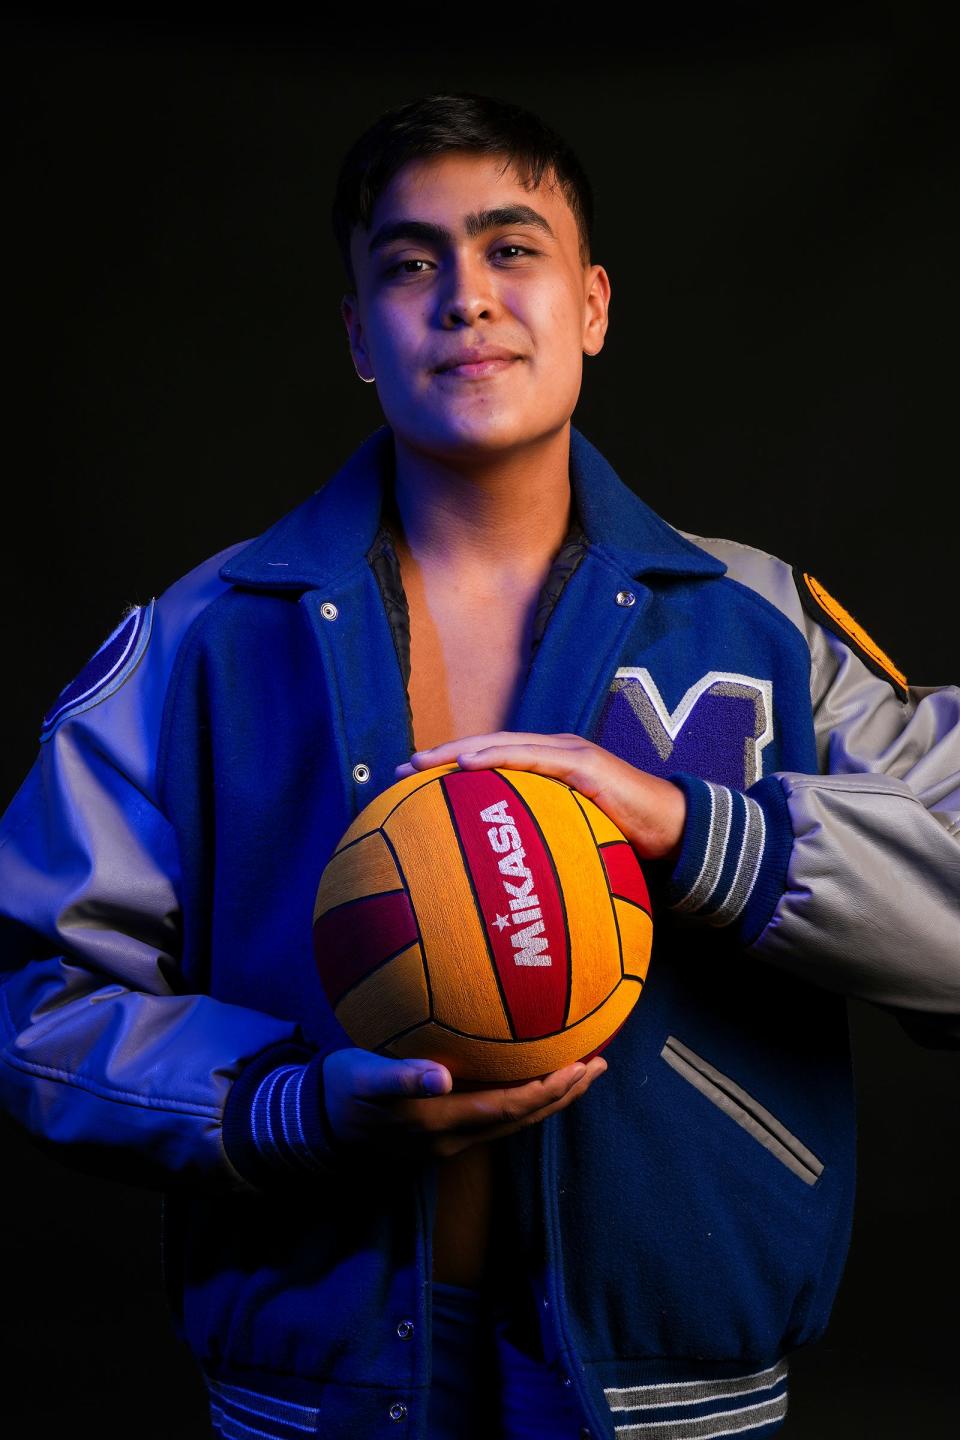 Andrew Wong is a water polo player from McCallum. He compared the sport to basketball because there is always someone impeding your way. For fun, he still likes to build with Legos.